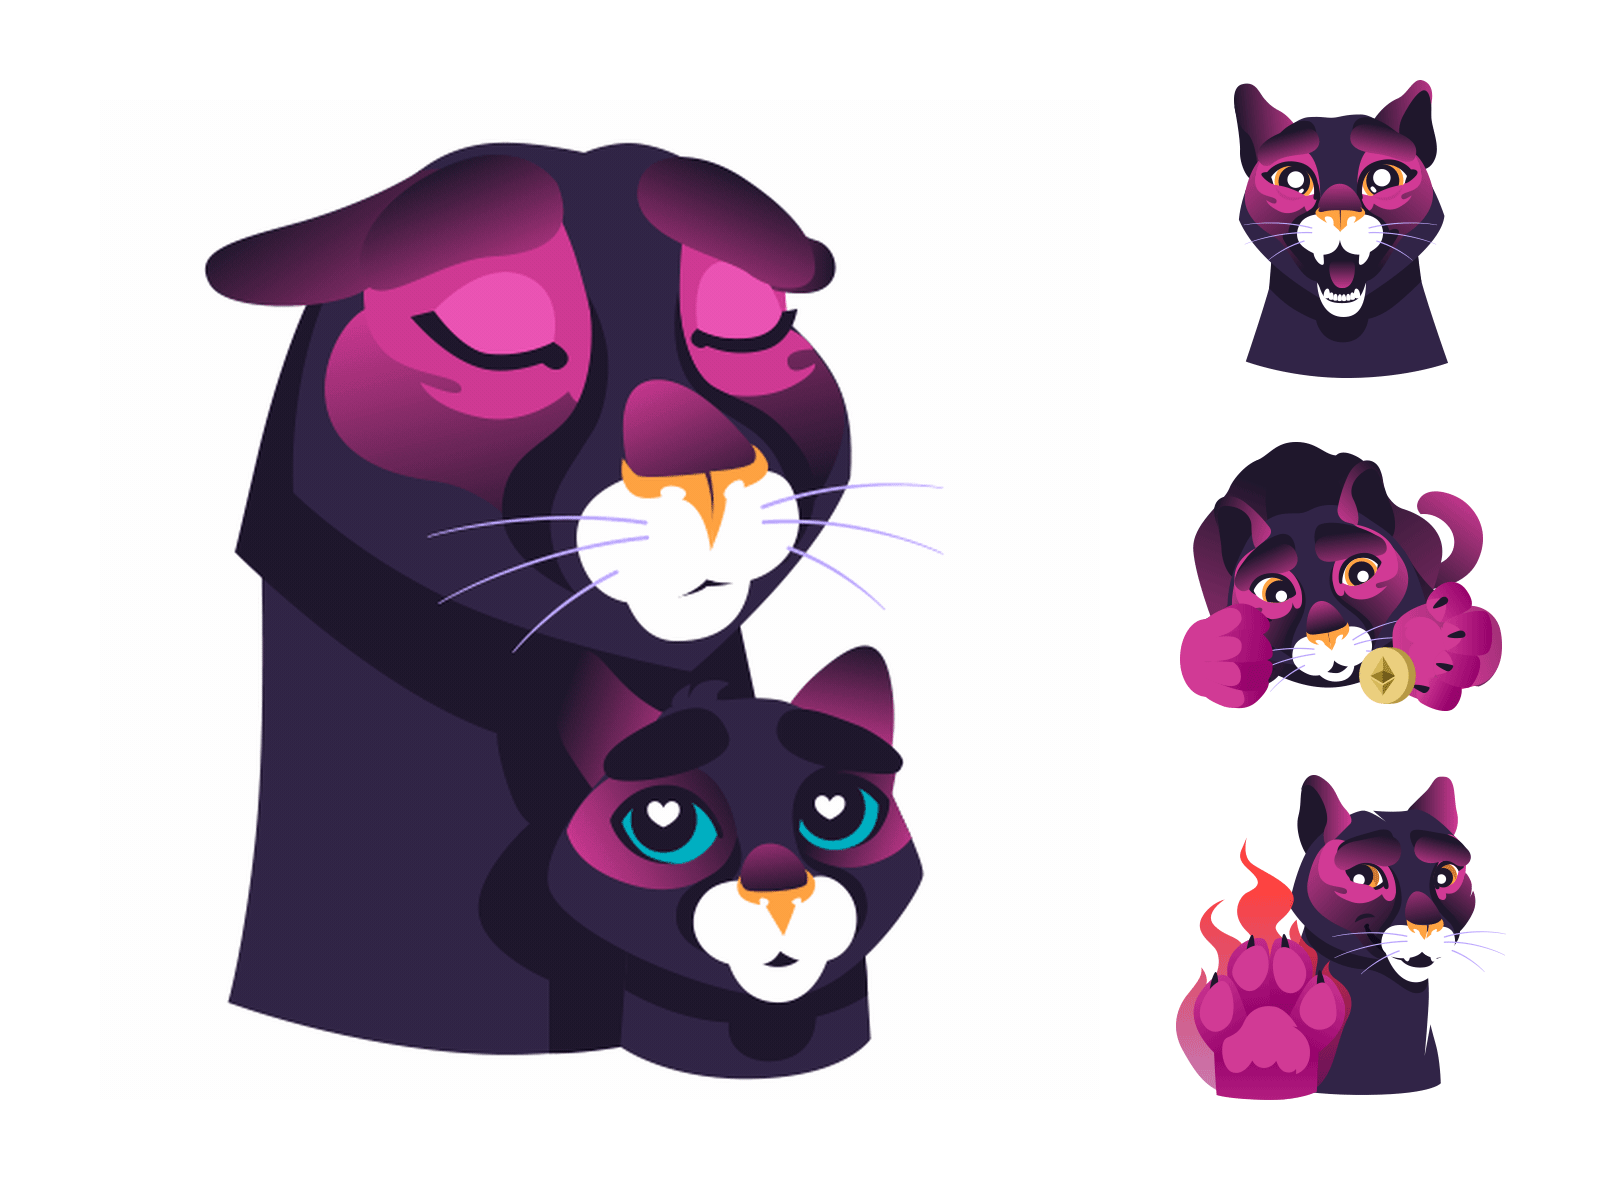 Сute purple cougar sticker pack adobe after effects adobe illustrator animals illustrated animation art cat charactedesign character character animation cougar cute art design design art icon illustration love purple sticker pack stickers vector